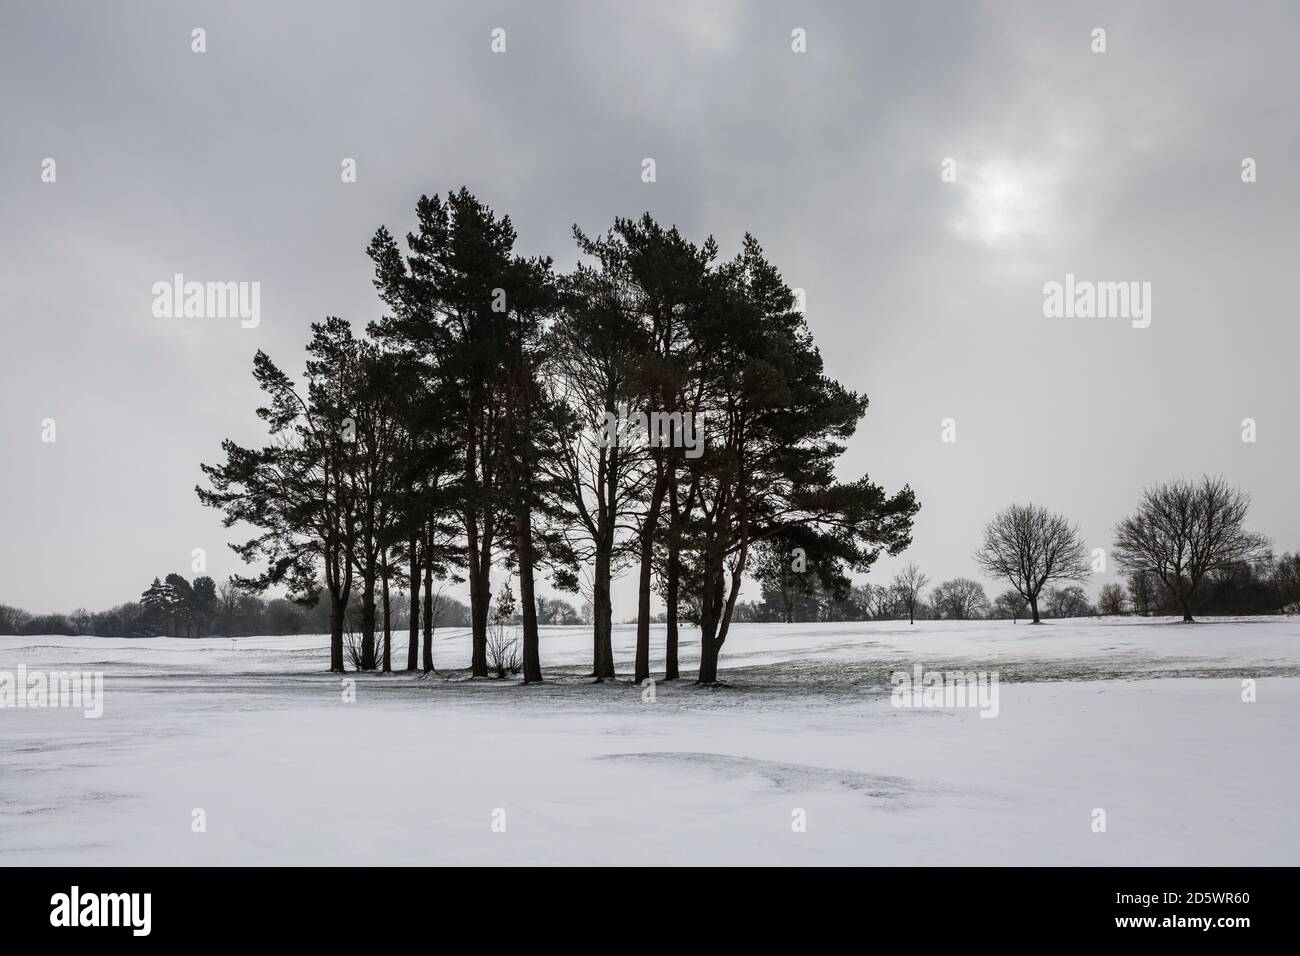 Winter landscape with pine trees Stock Photo